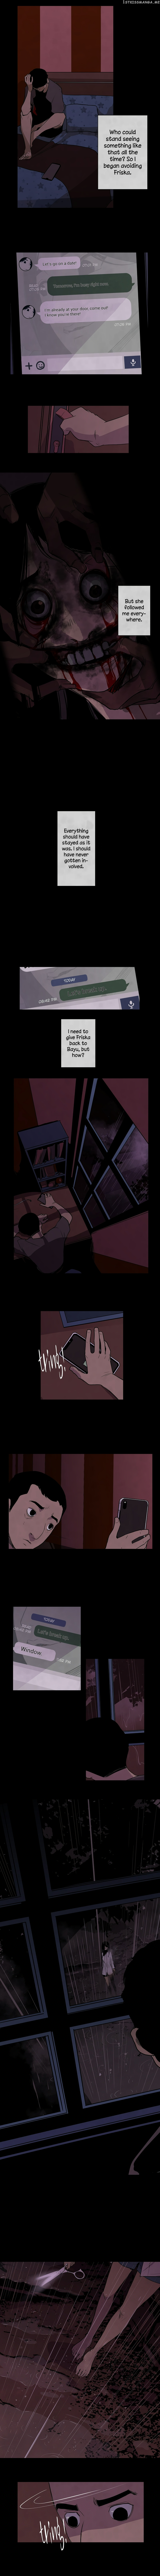 Creep In chapter 8 - page 4